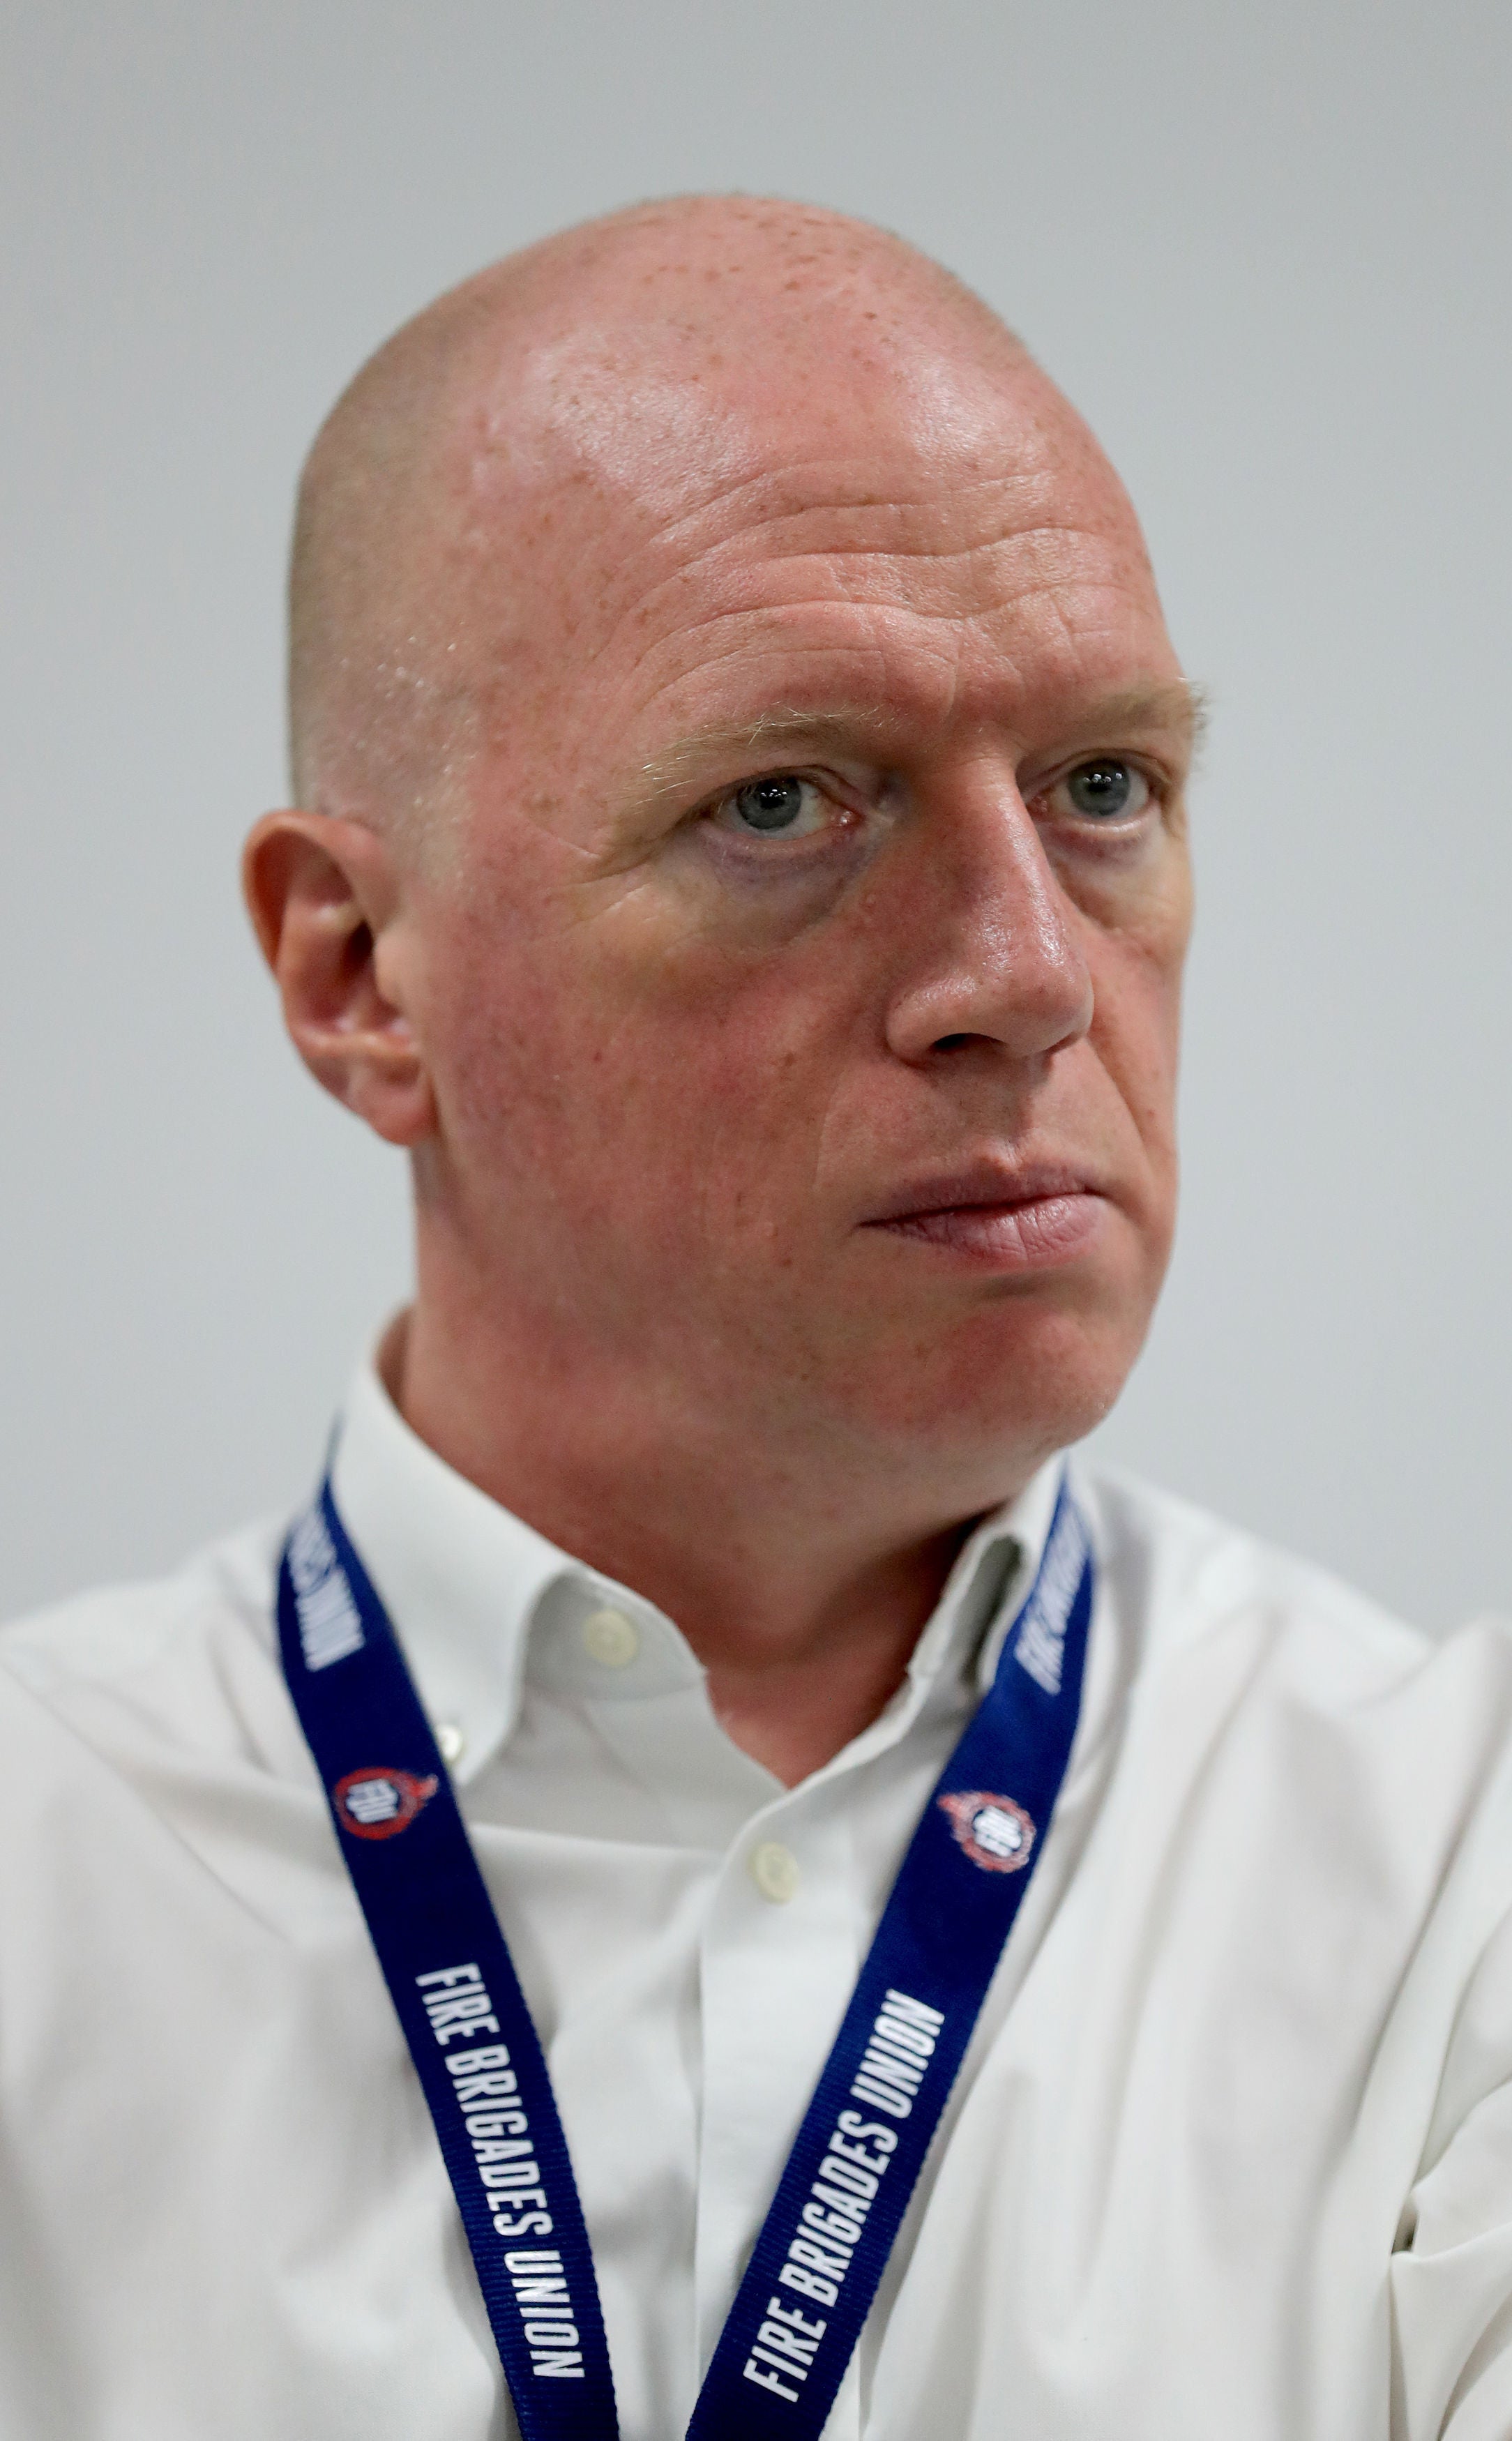 Matt Wrack, General Secretary of the Fire Brigades Union, speaks at a fringe meeting during the TUC conference at the Brighton Centre in Brighton.